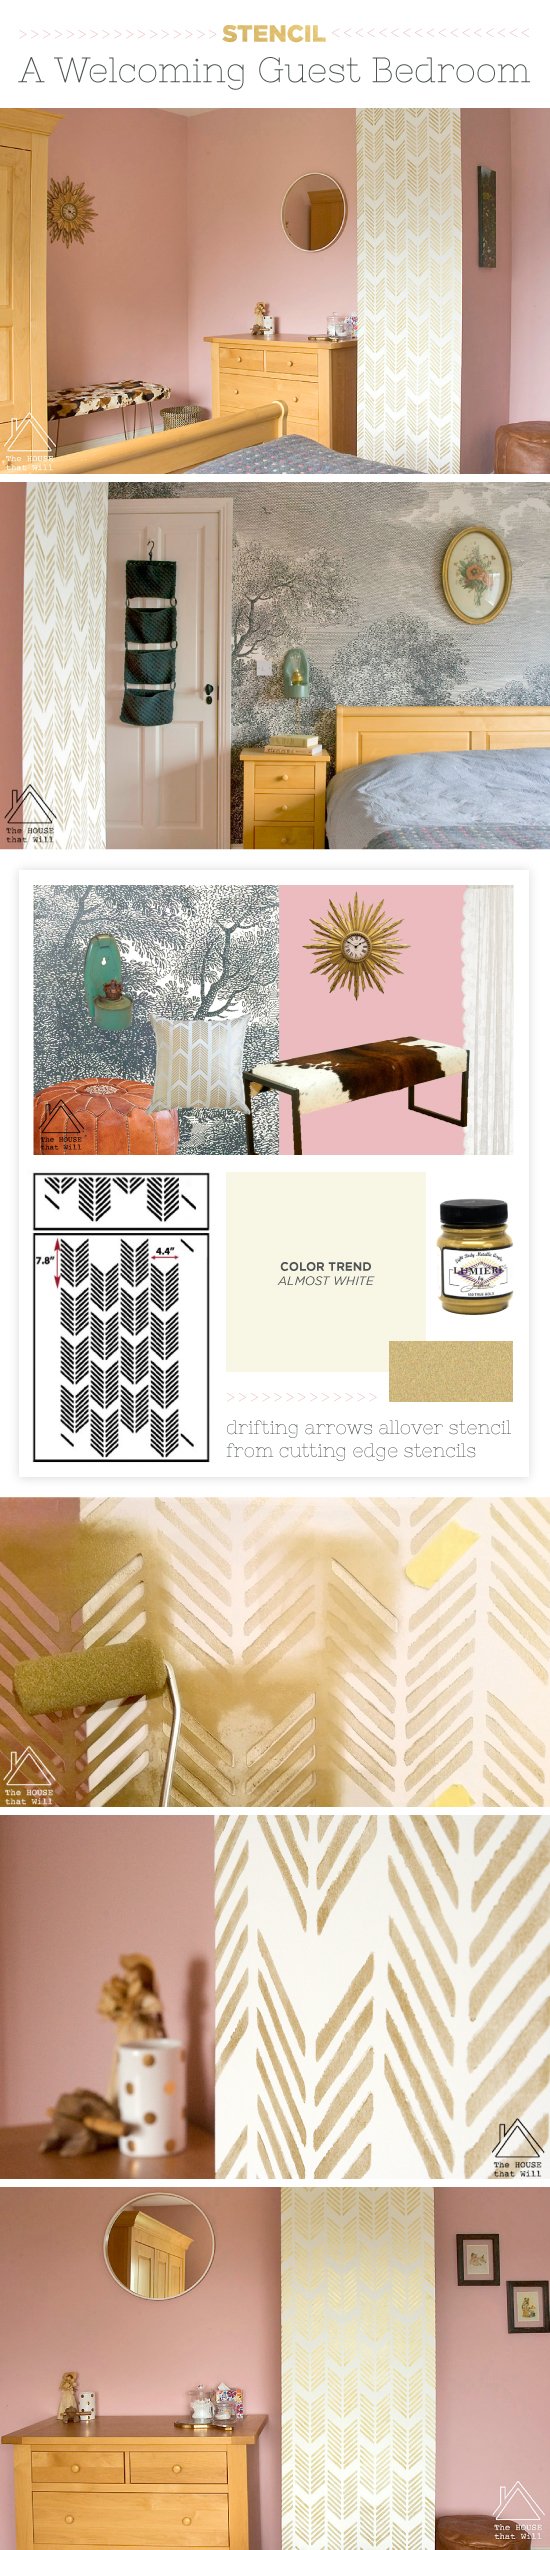 Cutting Edge Stencils shares a DIY stenciled accent wall in metallic gold in a guest bedroom using the Drifting Arrows Allover Stencil. http://www.cuttingedgestencils.com/drifting-arrows-stencil-pattern-diy-decor.html